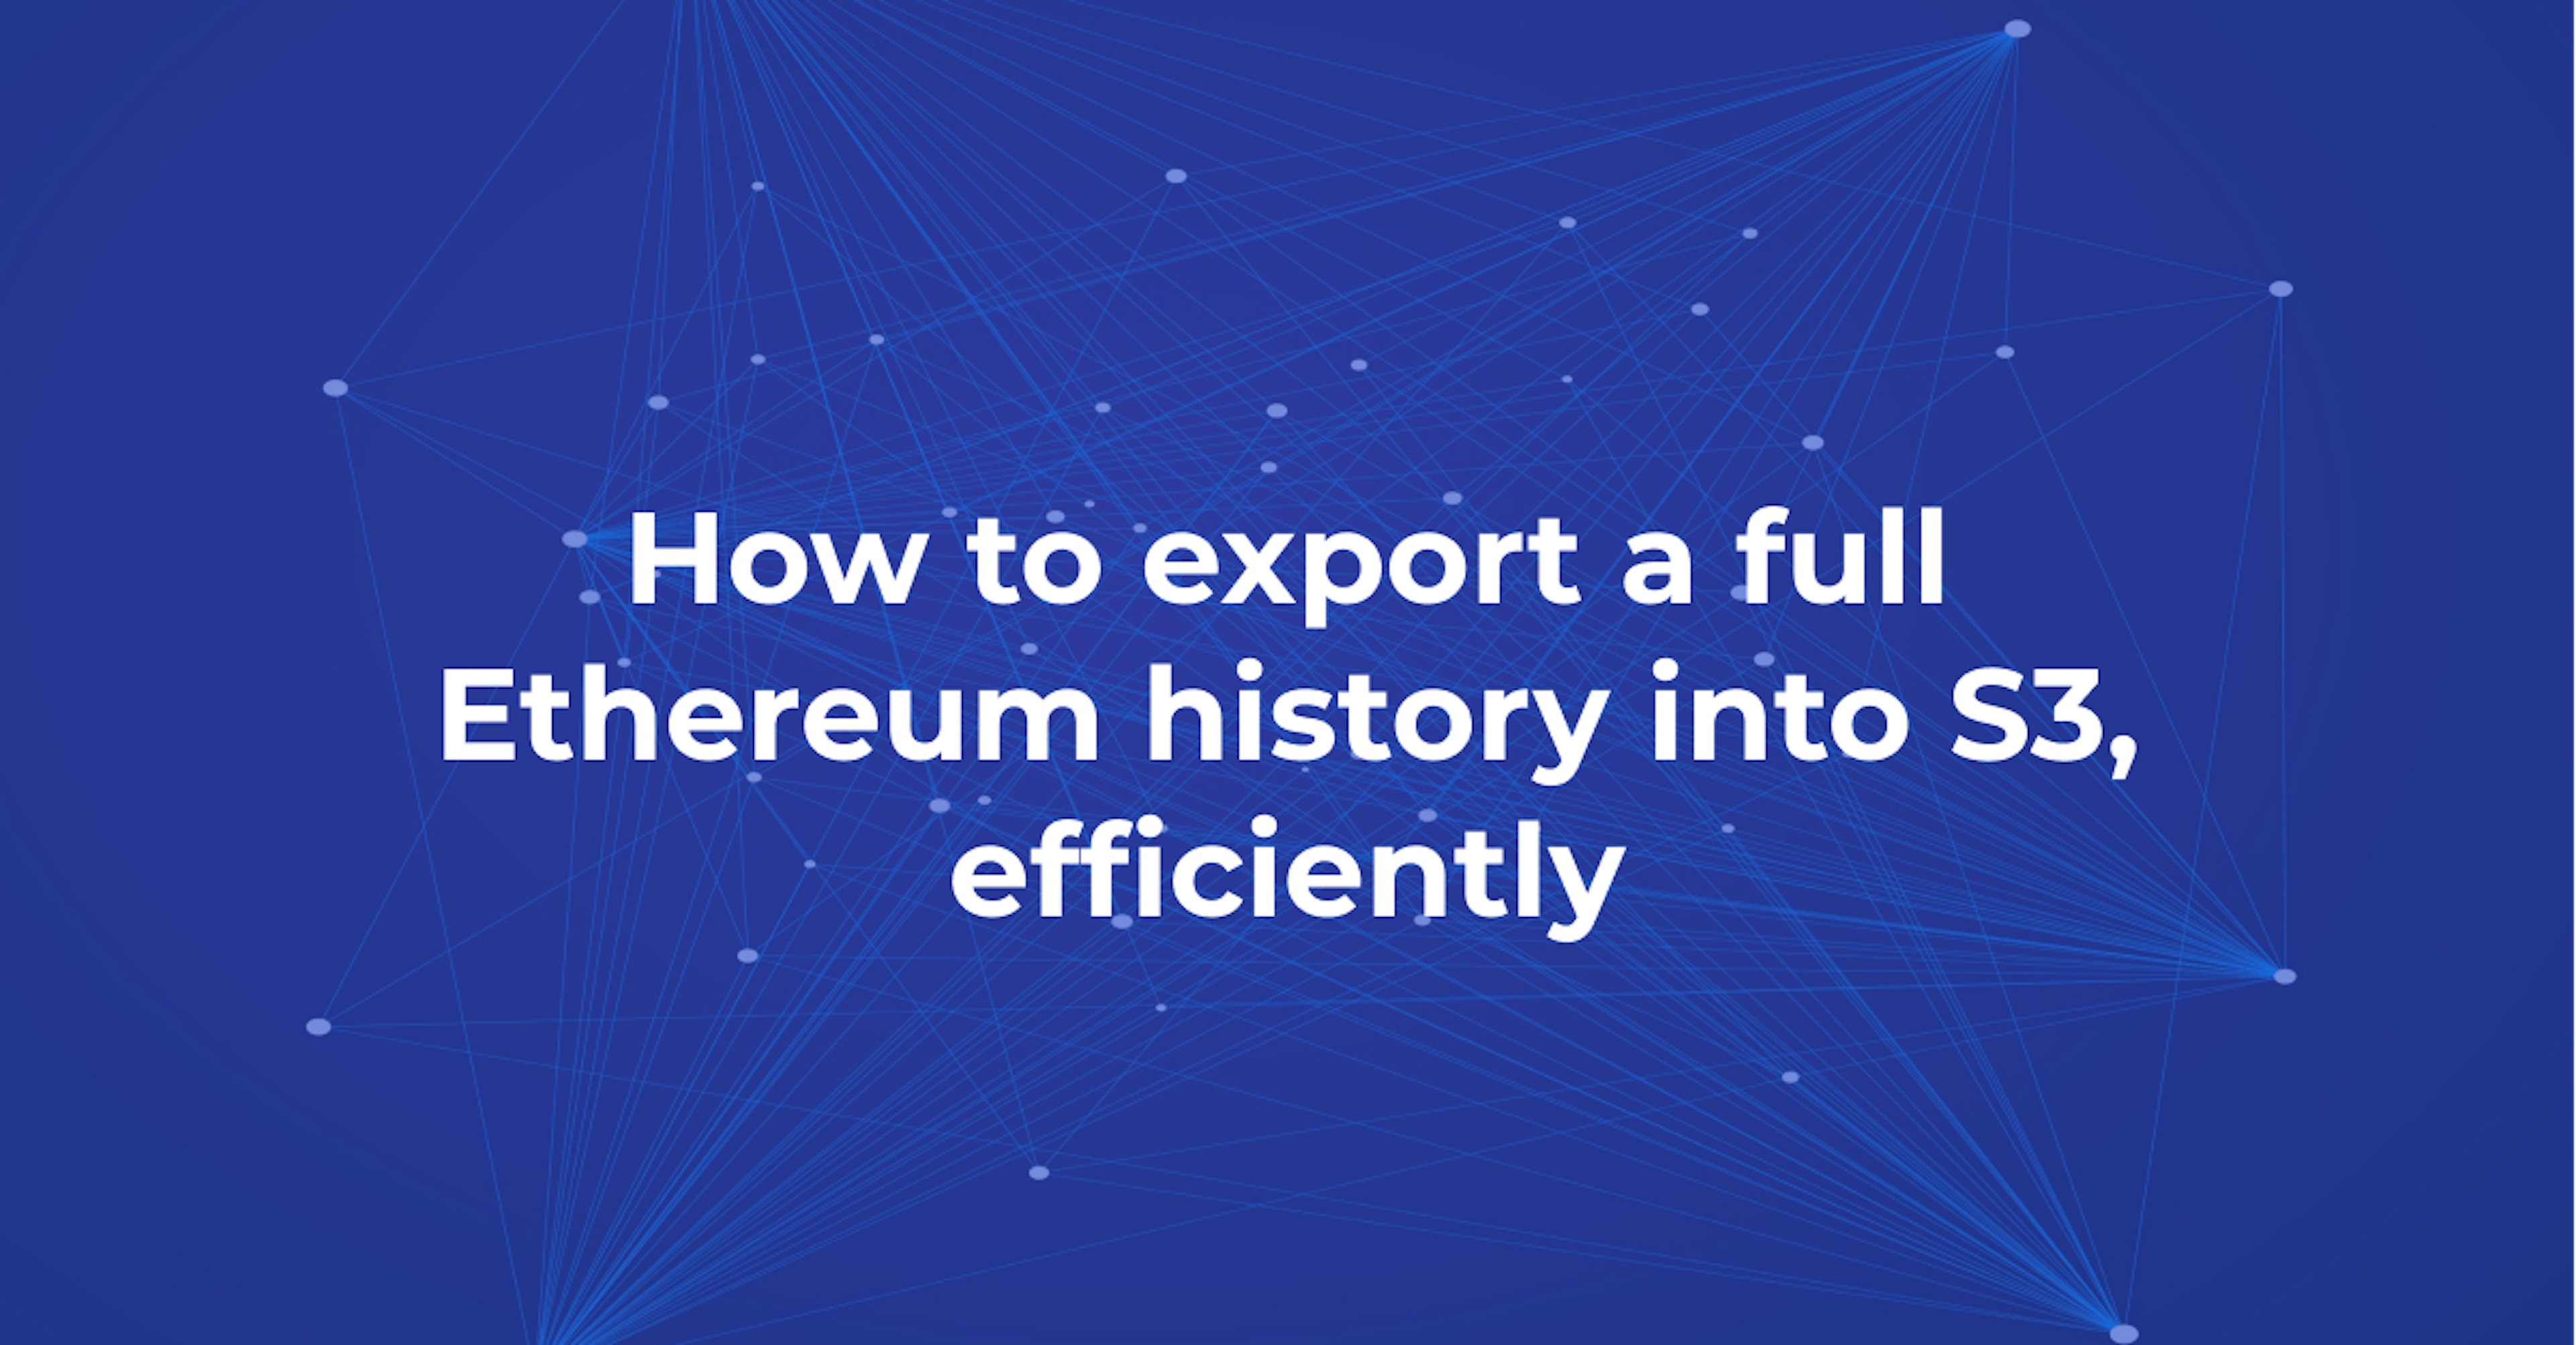 How to export a full Ethereum history into S3, efficiently